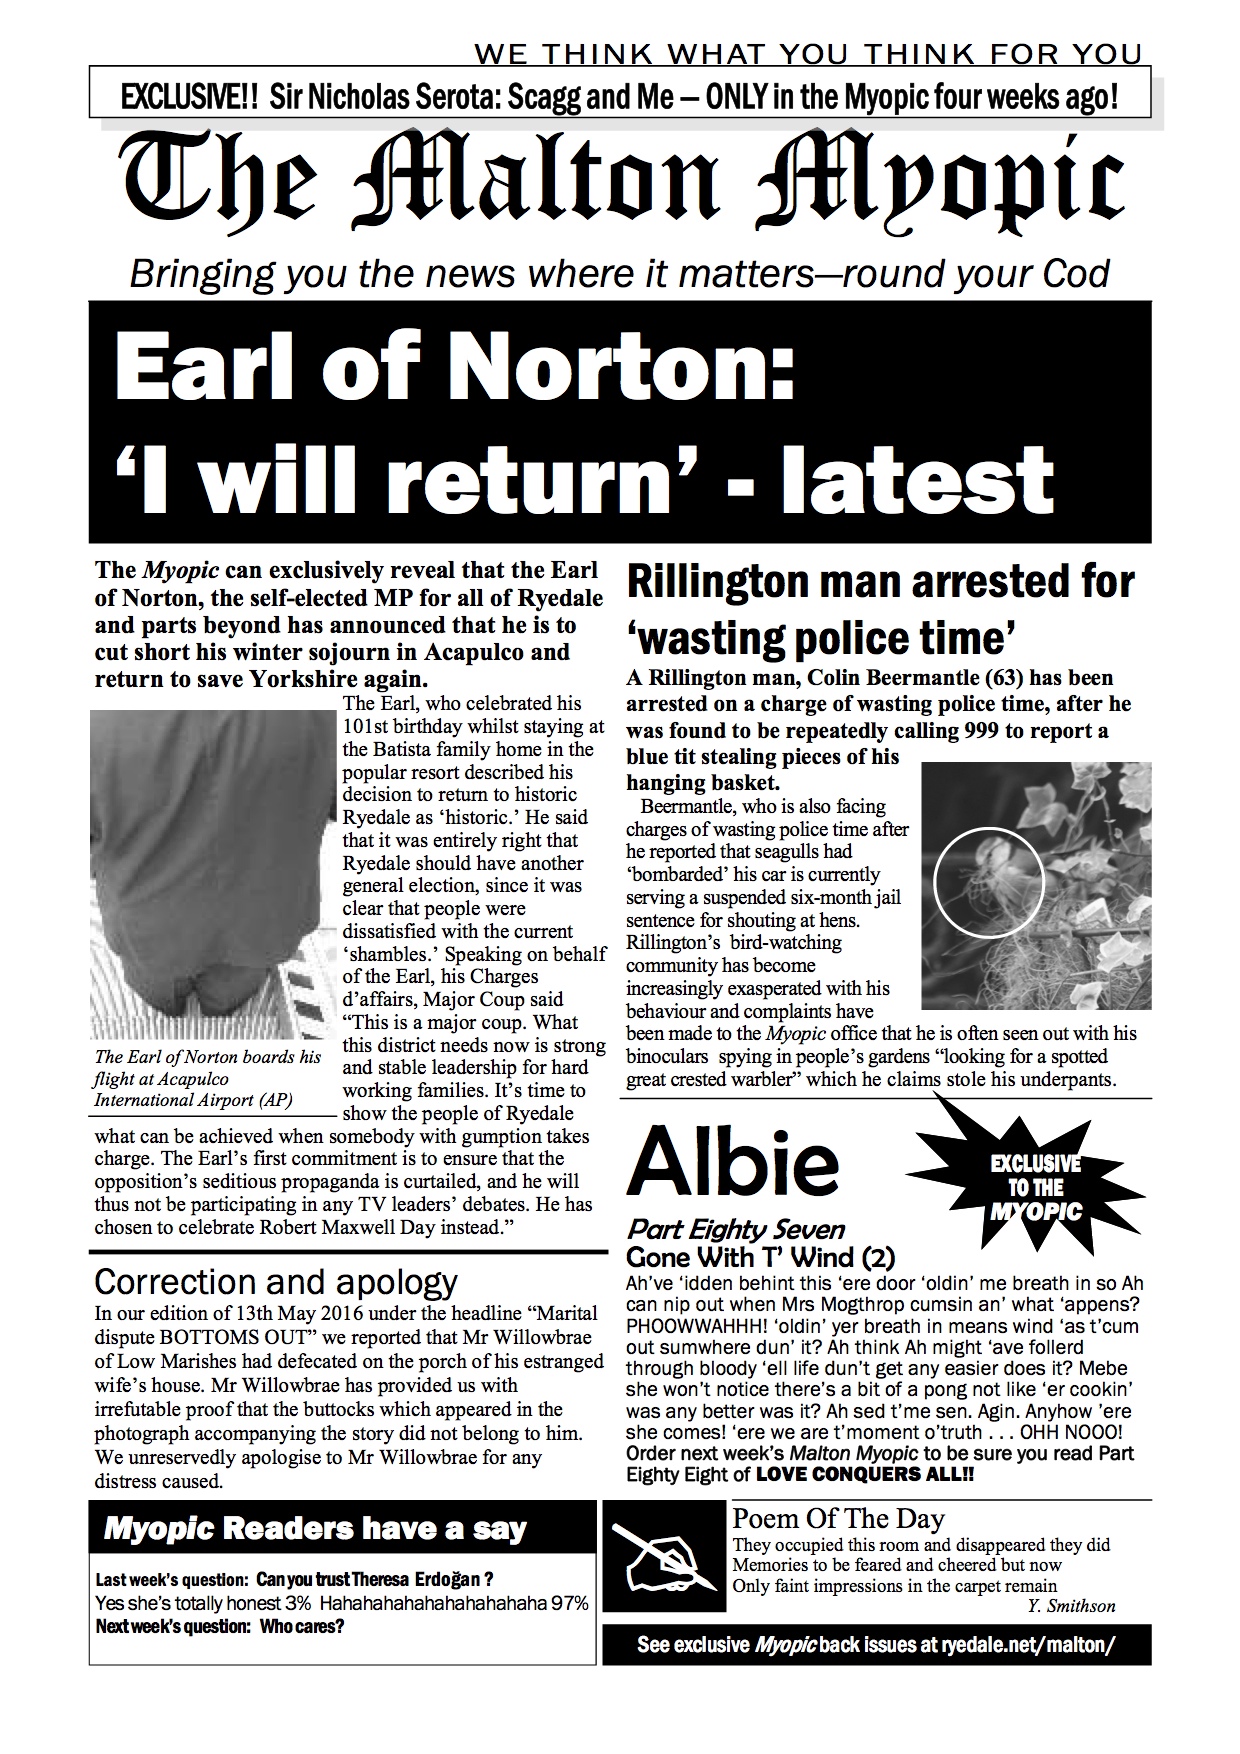 Earl of Norton is MP for Ryedale. Elections 2017 - new Thirsk and Malton MP is the Earl of Norton. Major Coup.